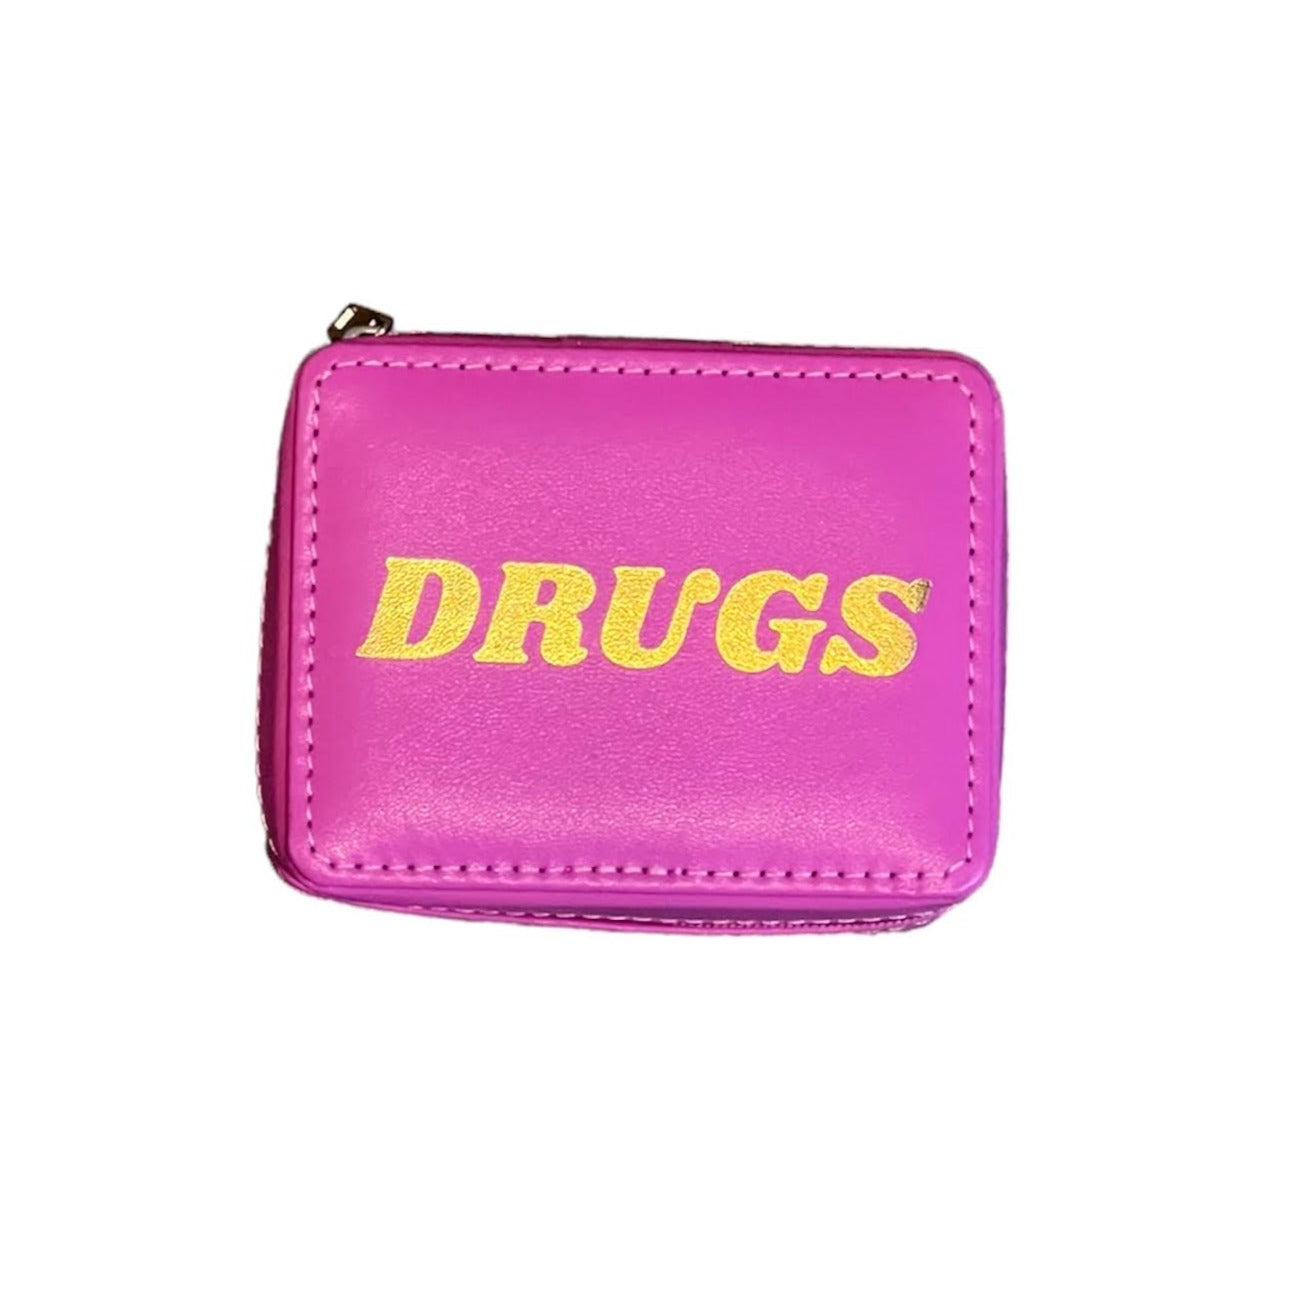 DRUGS PINK PILL CASE